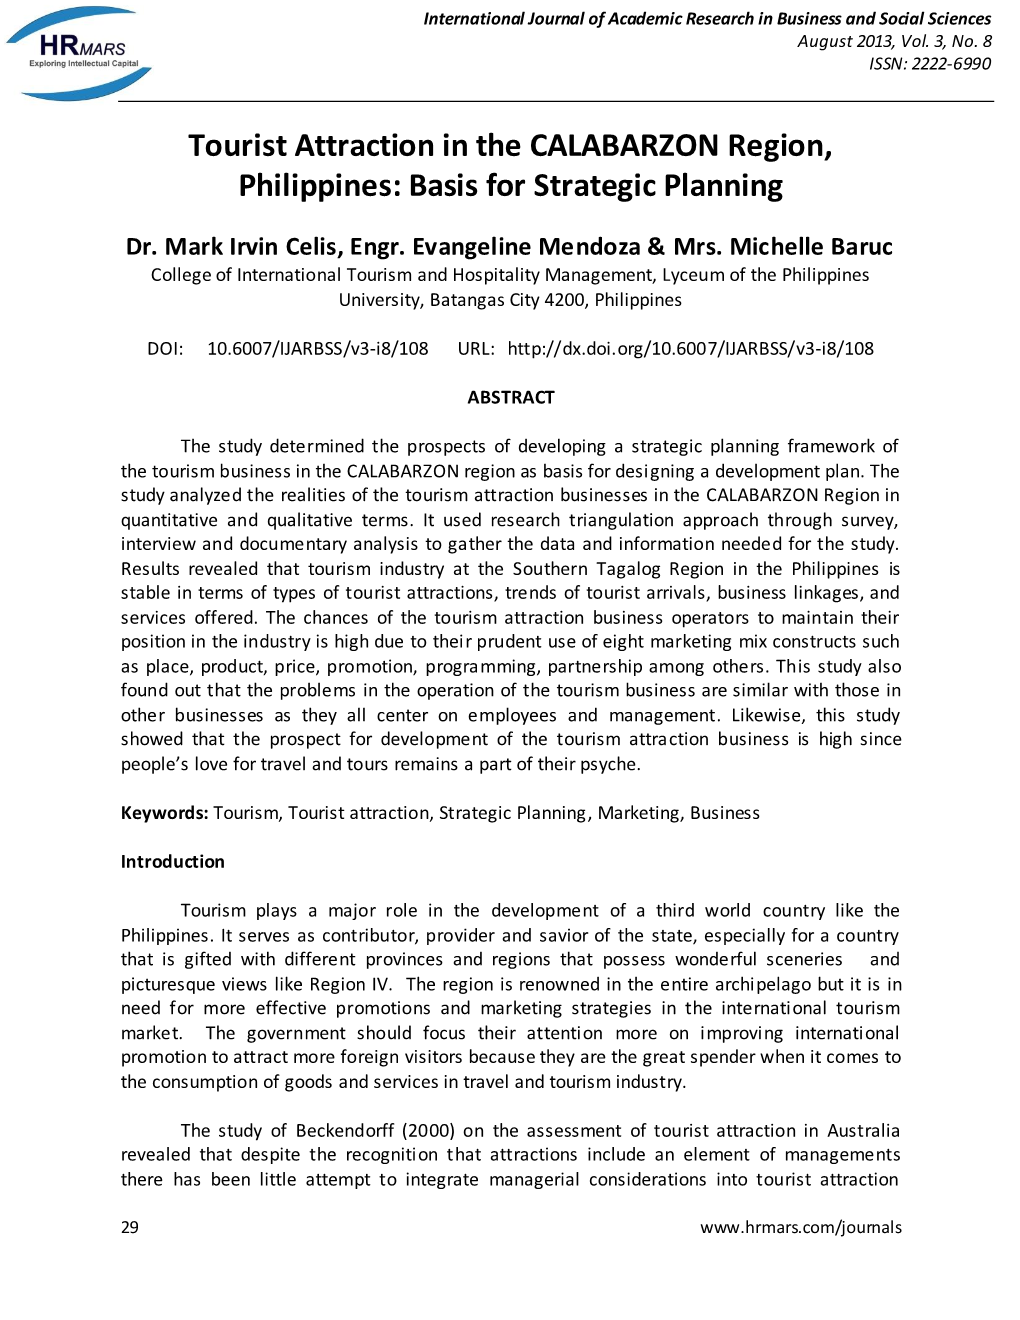 Tourist Attraction in the CALABARZON Region, Philippines: Basis for Strategic Planning